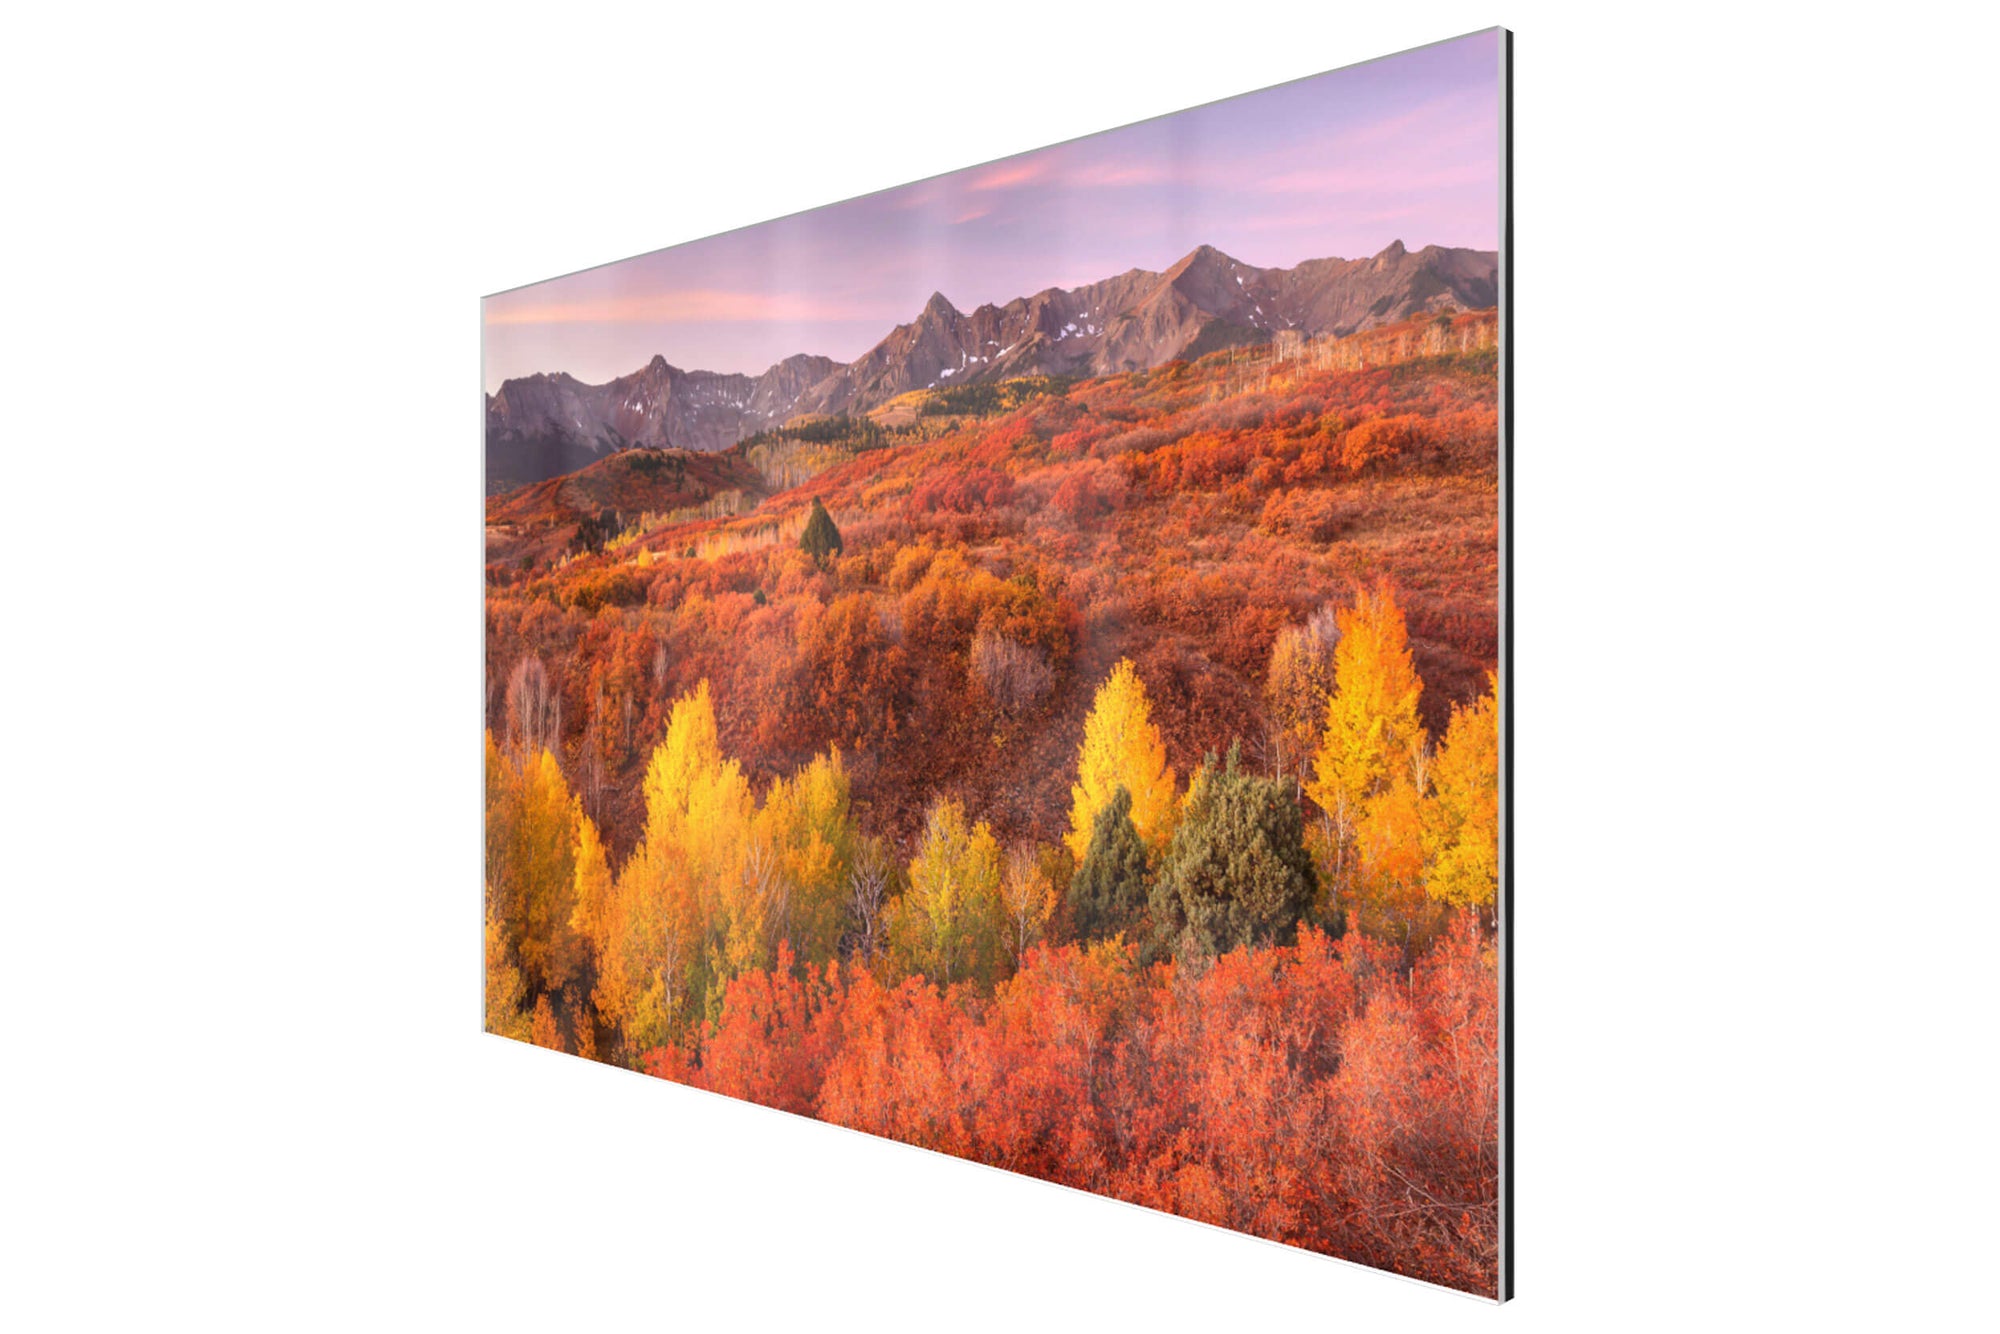 A piece of TruLife acrylic Telluride art shows a Dallas Divide fall colors picture.